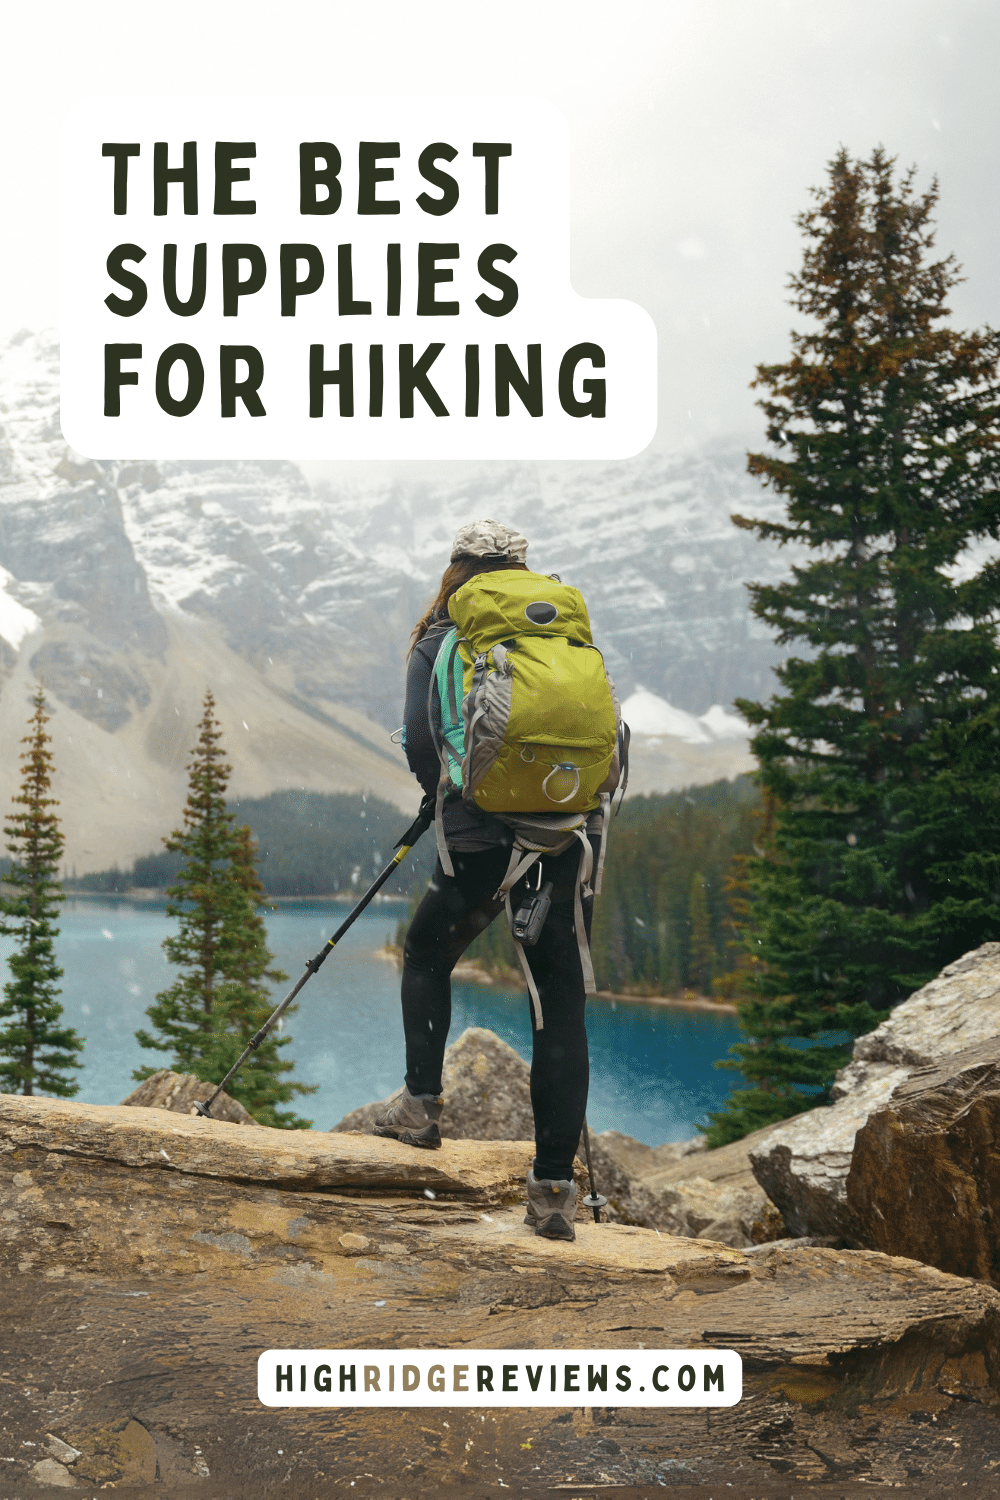 Conquer The Outdoors: A Look At The Best Hiking Supplies